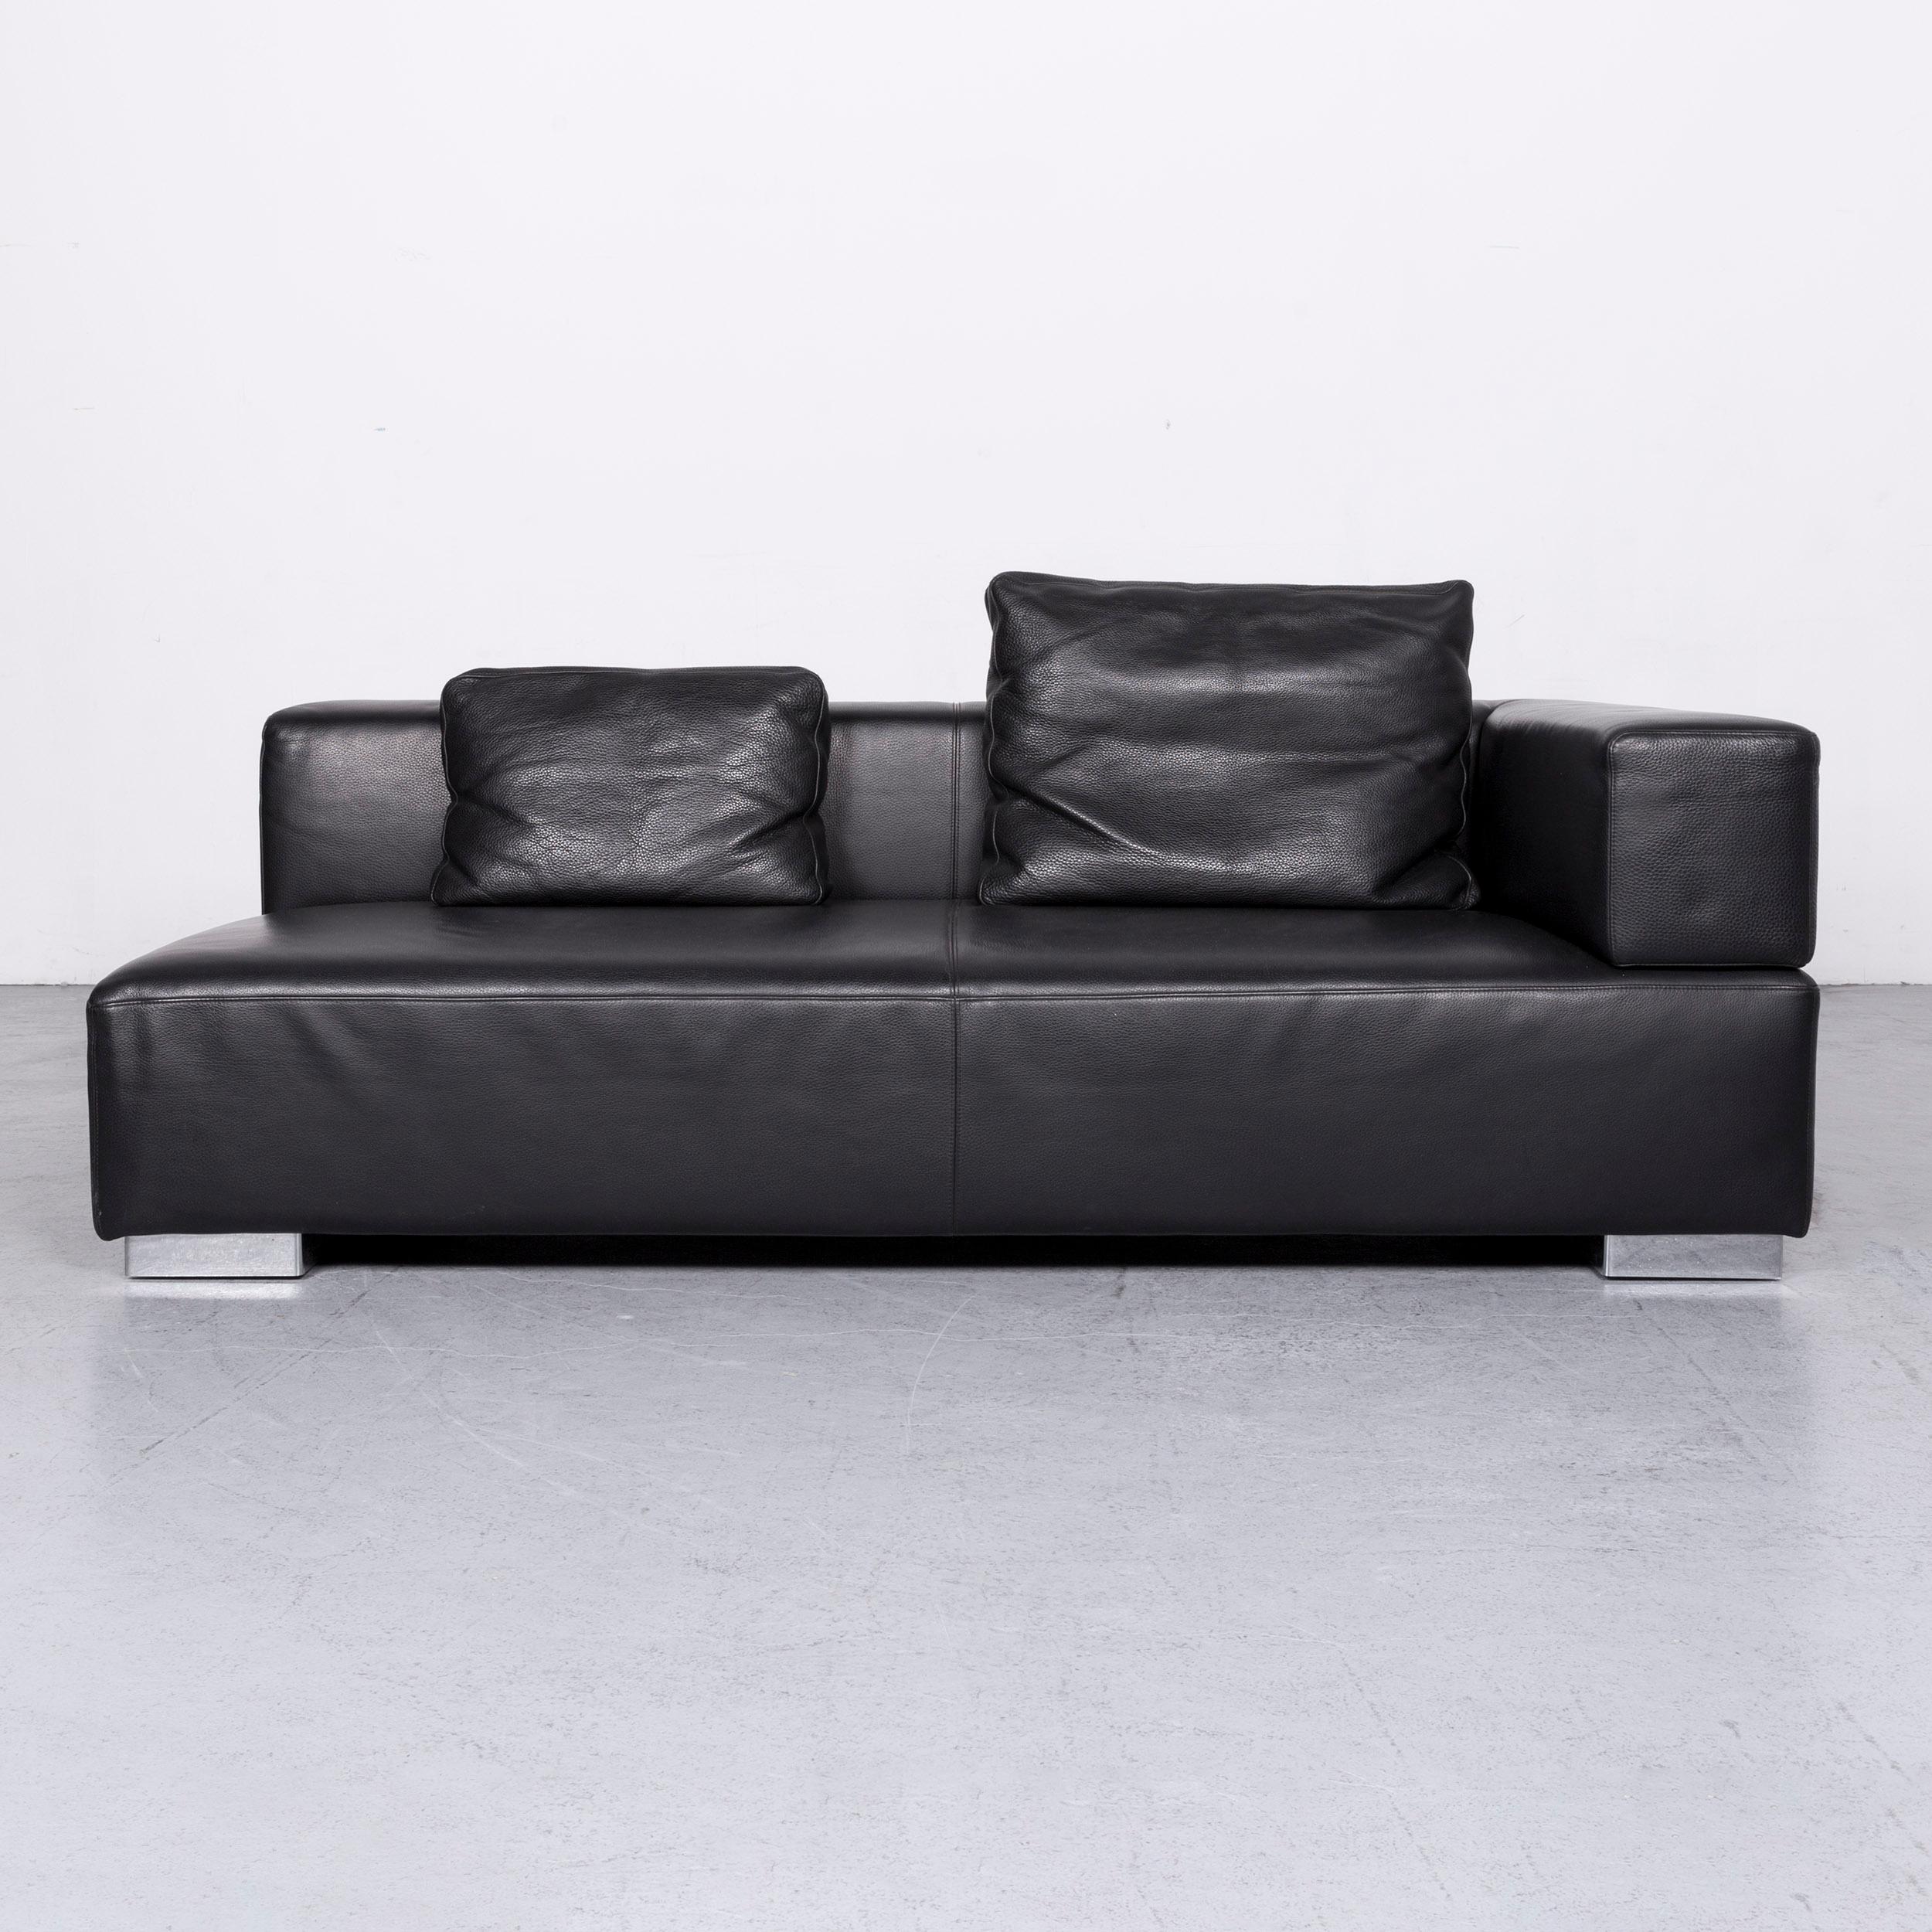 Brühl & Sippold Designer Sofa Set Leather Black Two-Seat Couch Modern For Sale 6